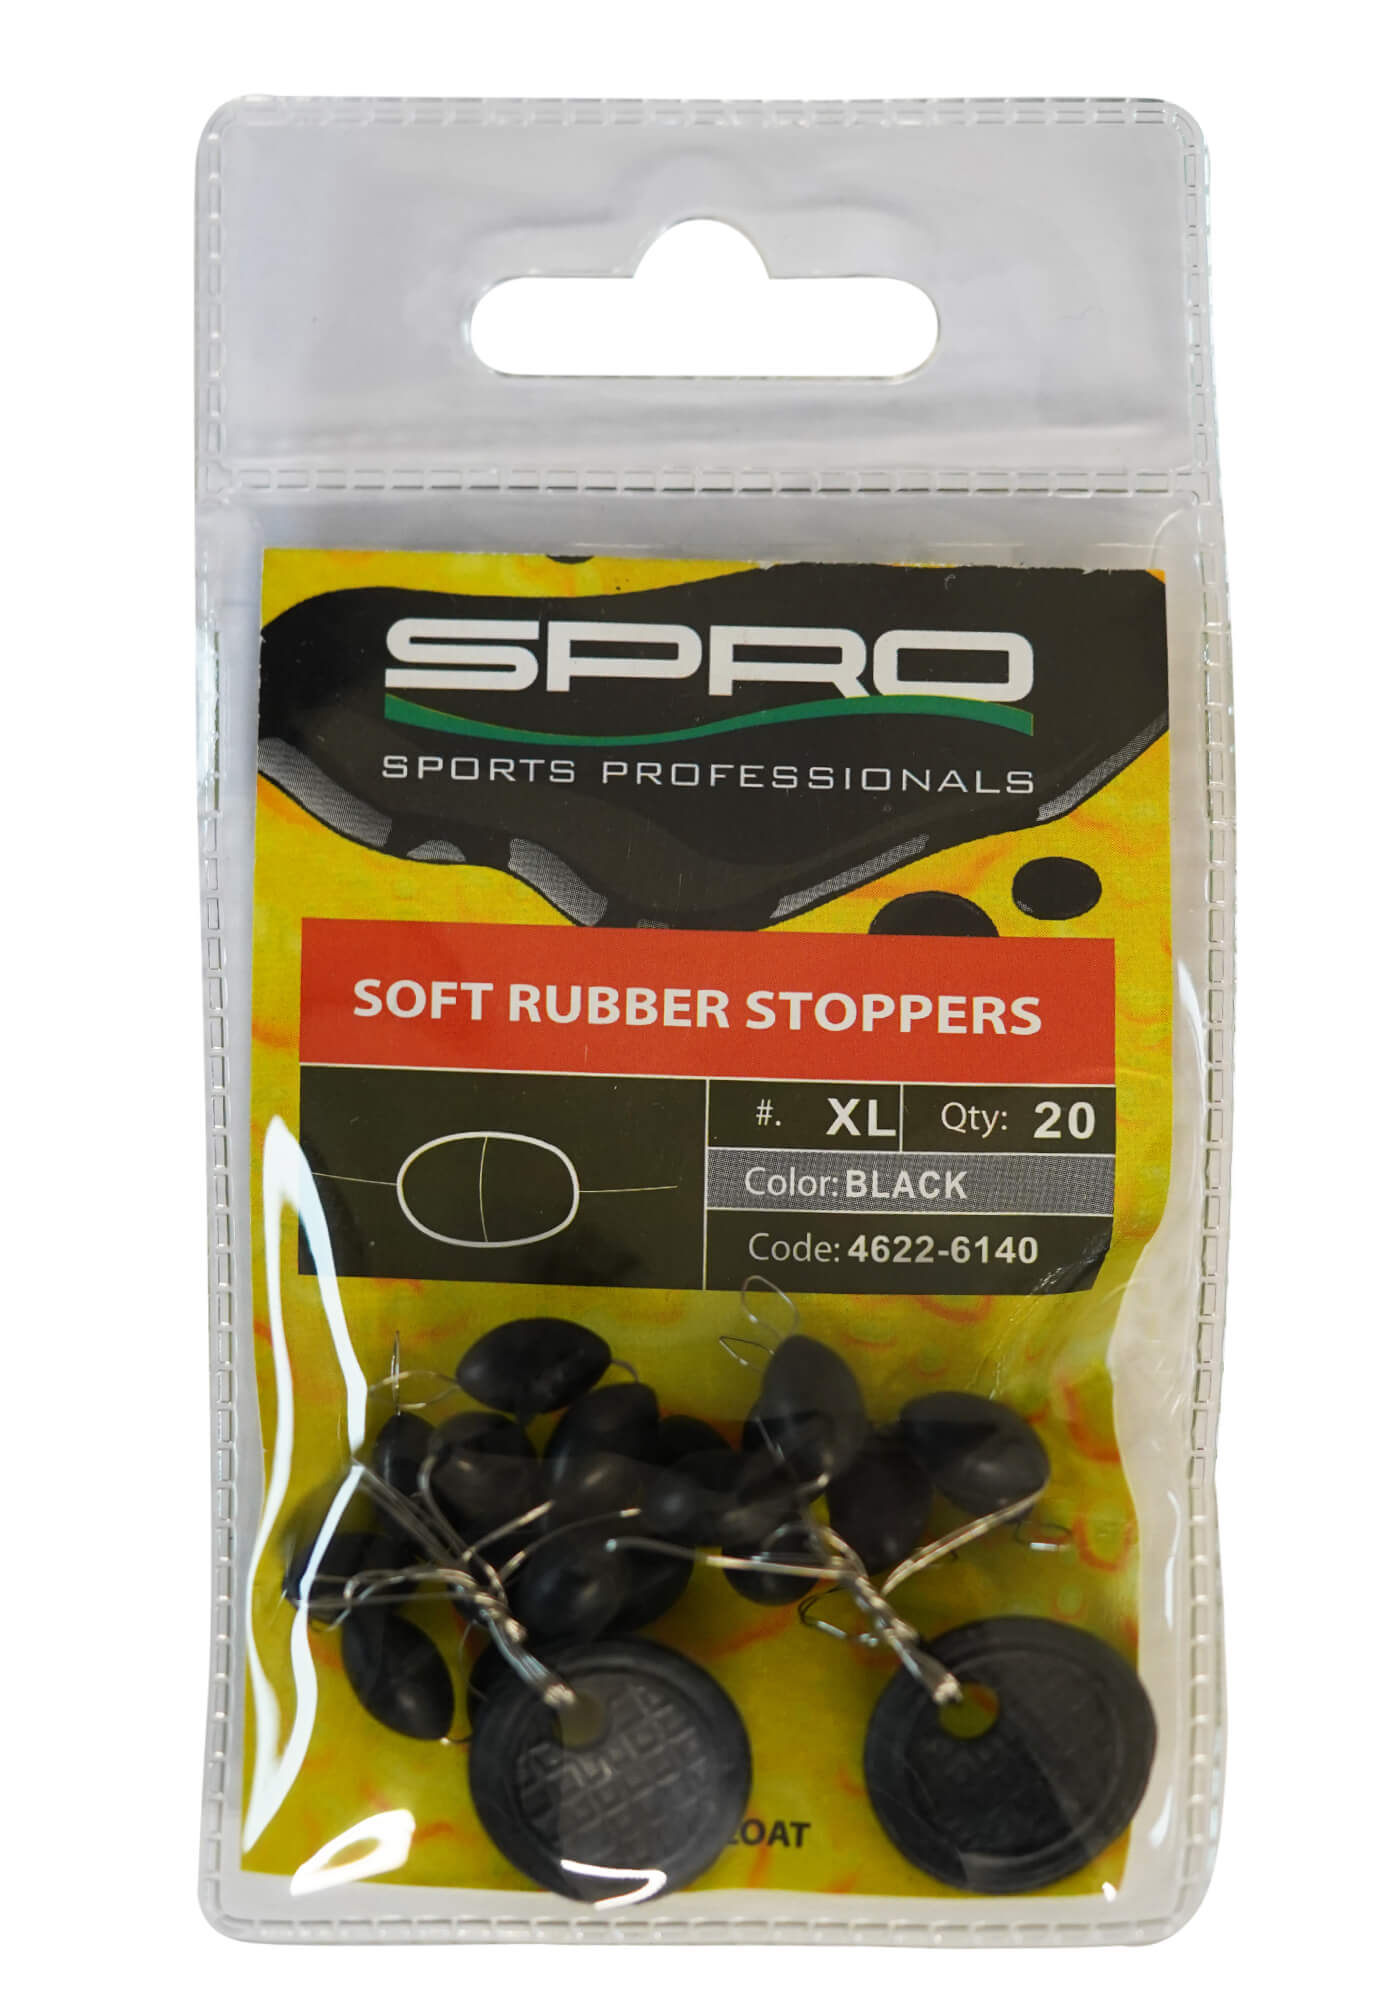 Sizes_Soft_Rubber_Stoppers_XL